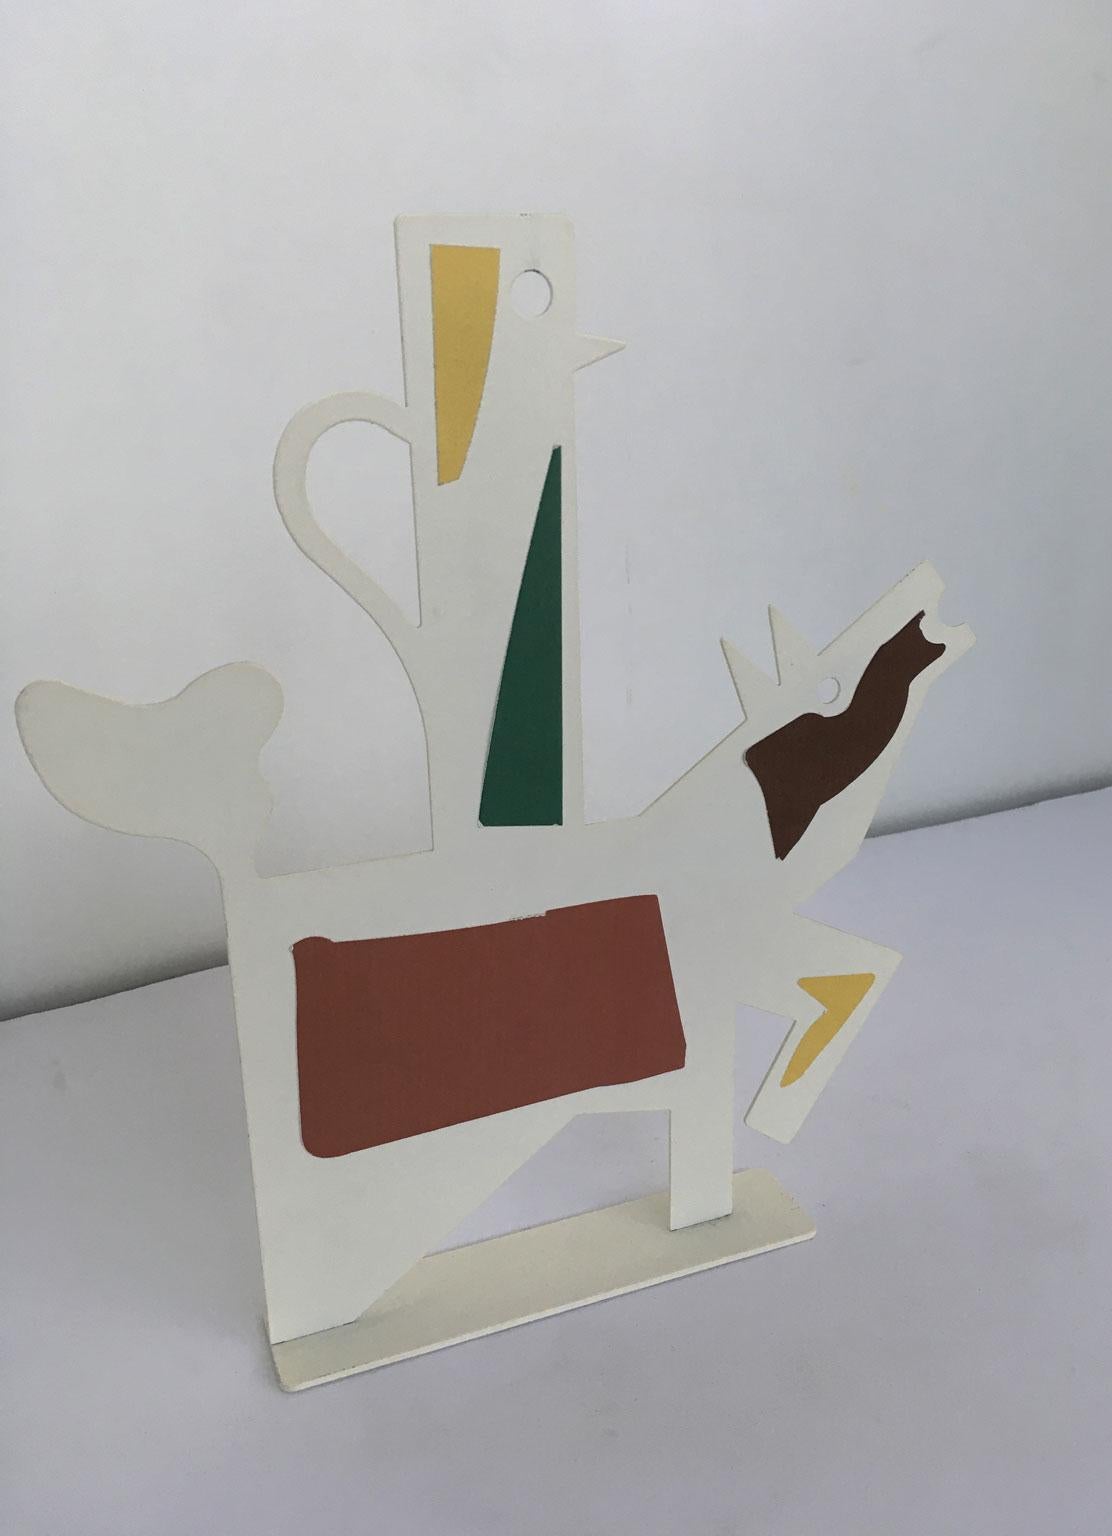 Italy 1980 Riccardo Dalisi White Painted Metal Sculpture Muccacaffè For Sale 13